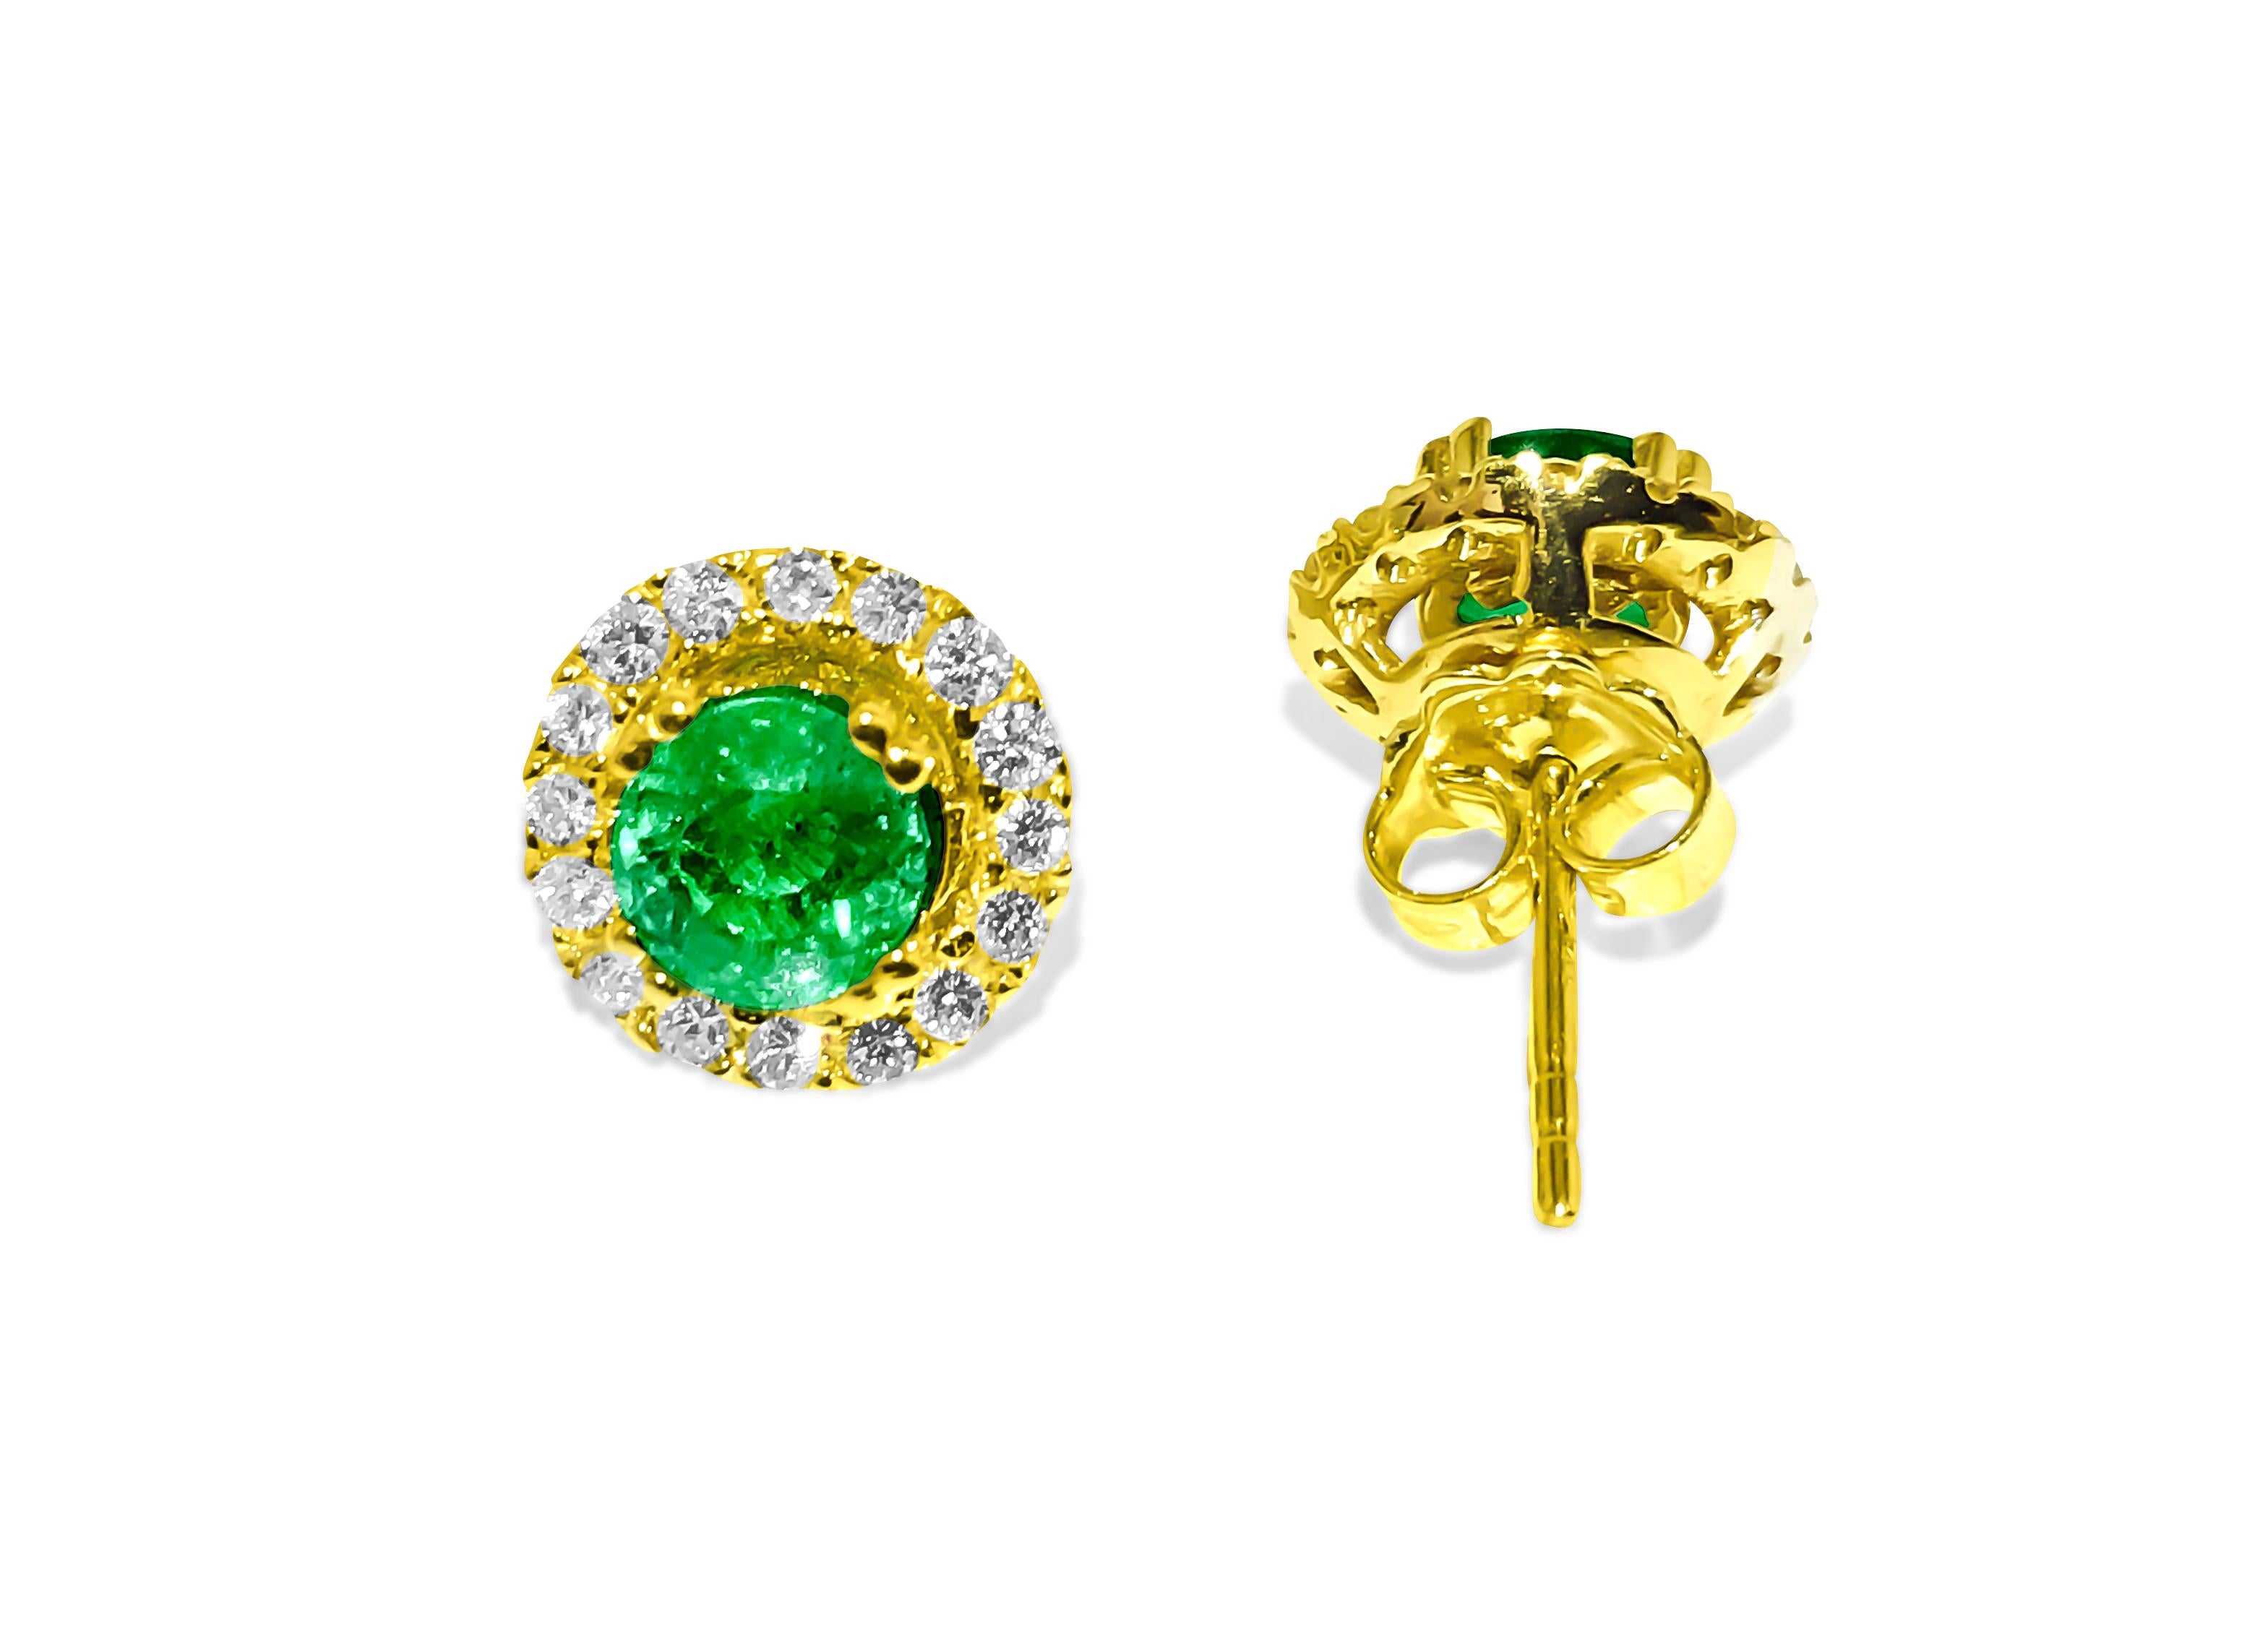 Add a touch of luxury to your ensemble with these stunning stud earrings crafted from 14K yellow gold, featuring a magnificent 2.00 carat emerald and 0.90 carats of G color, VS clarity diamonds. With a total carat weight of 2.90 carats and all